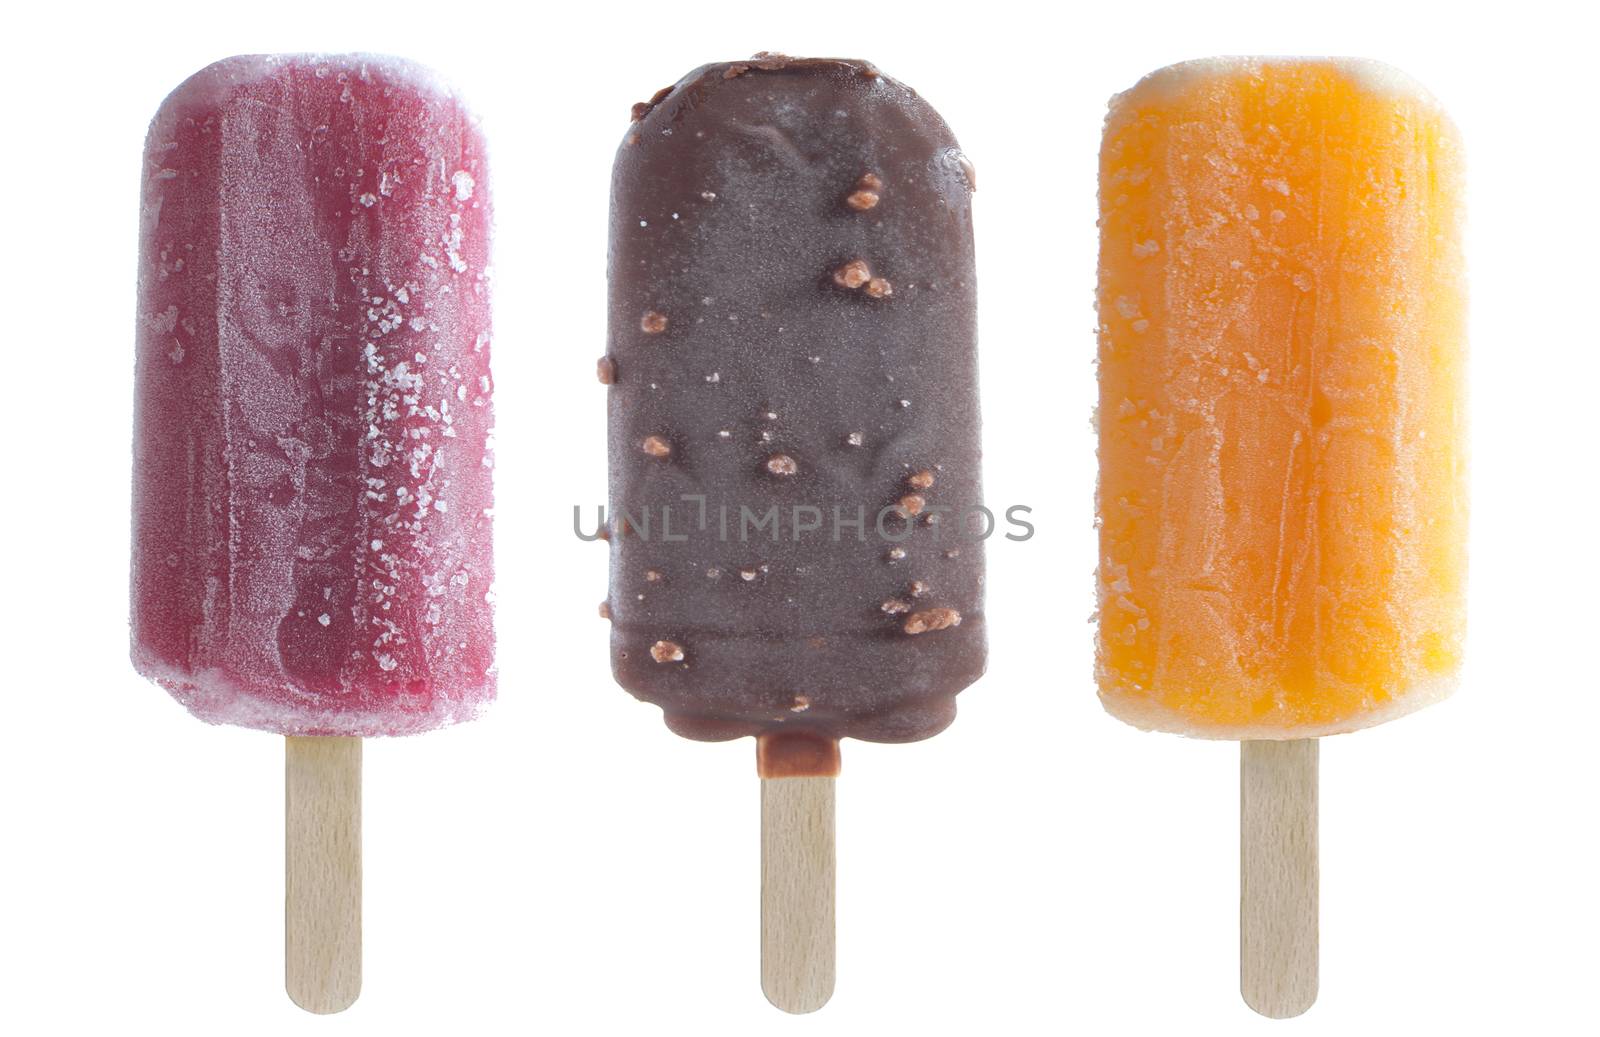 Set of ice popsicles including orange, chocolate and raspberry flavors